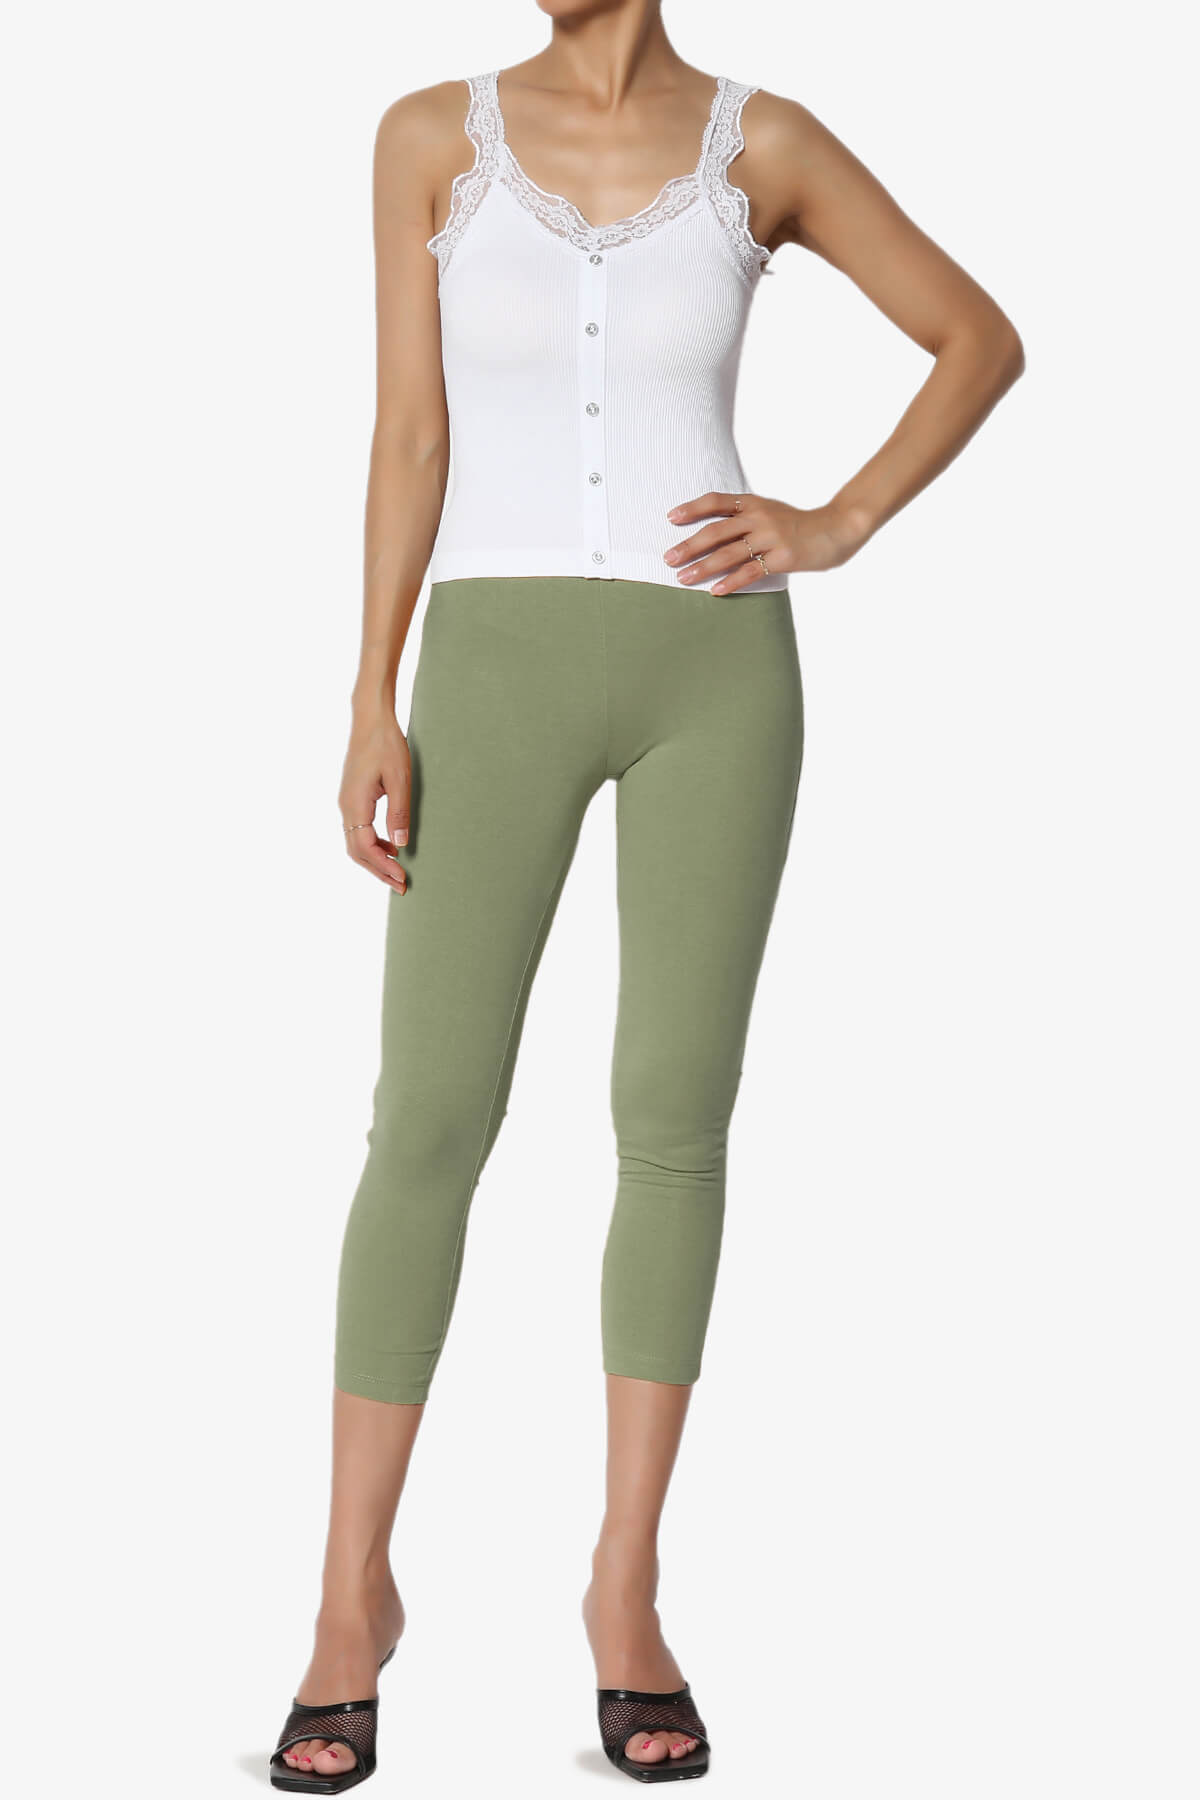 Load image into Gallery viewer, Ansley Luxe Cotton Capri Leggings DUSTY OLIVE_6
